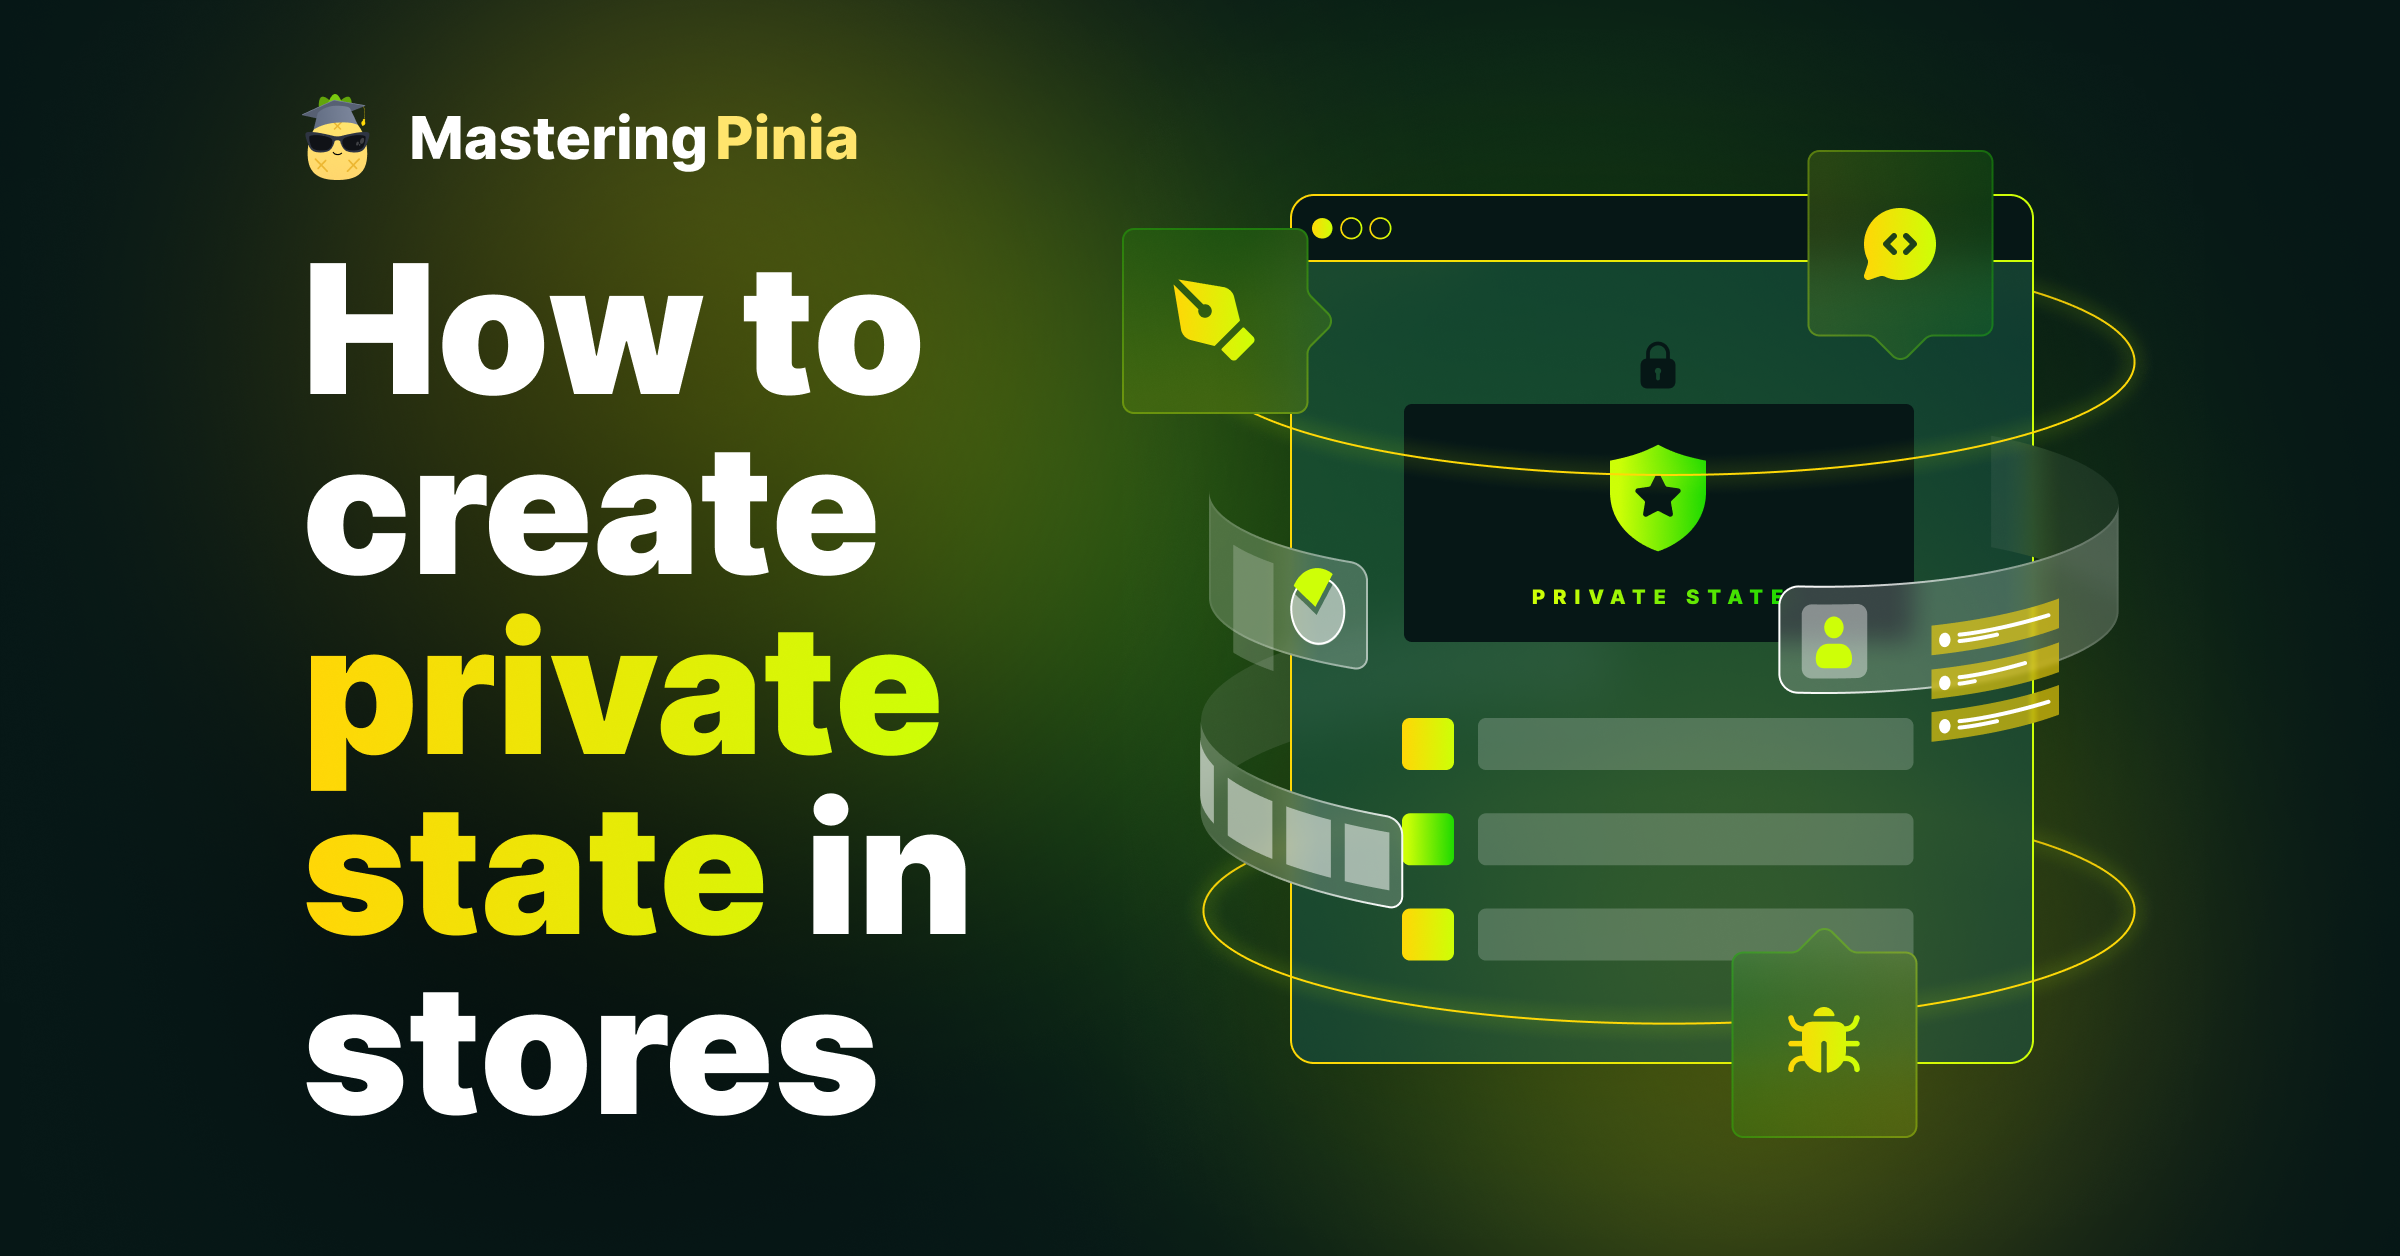 How to create private state in stores